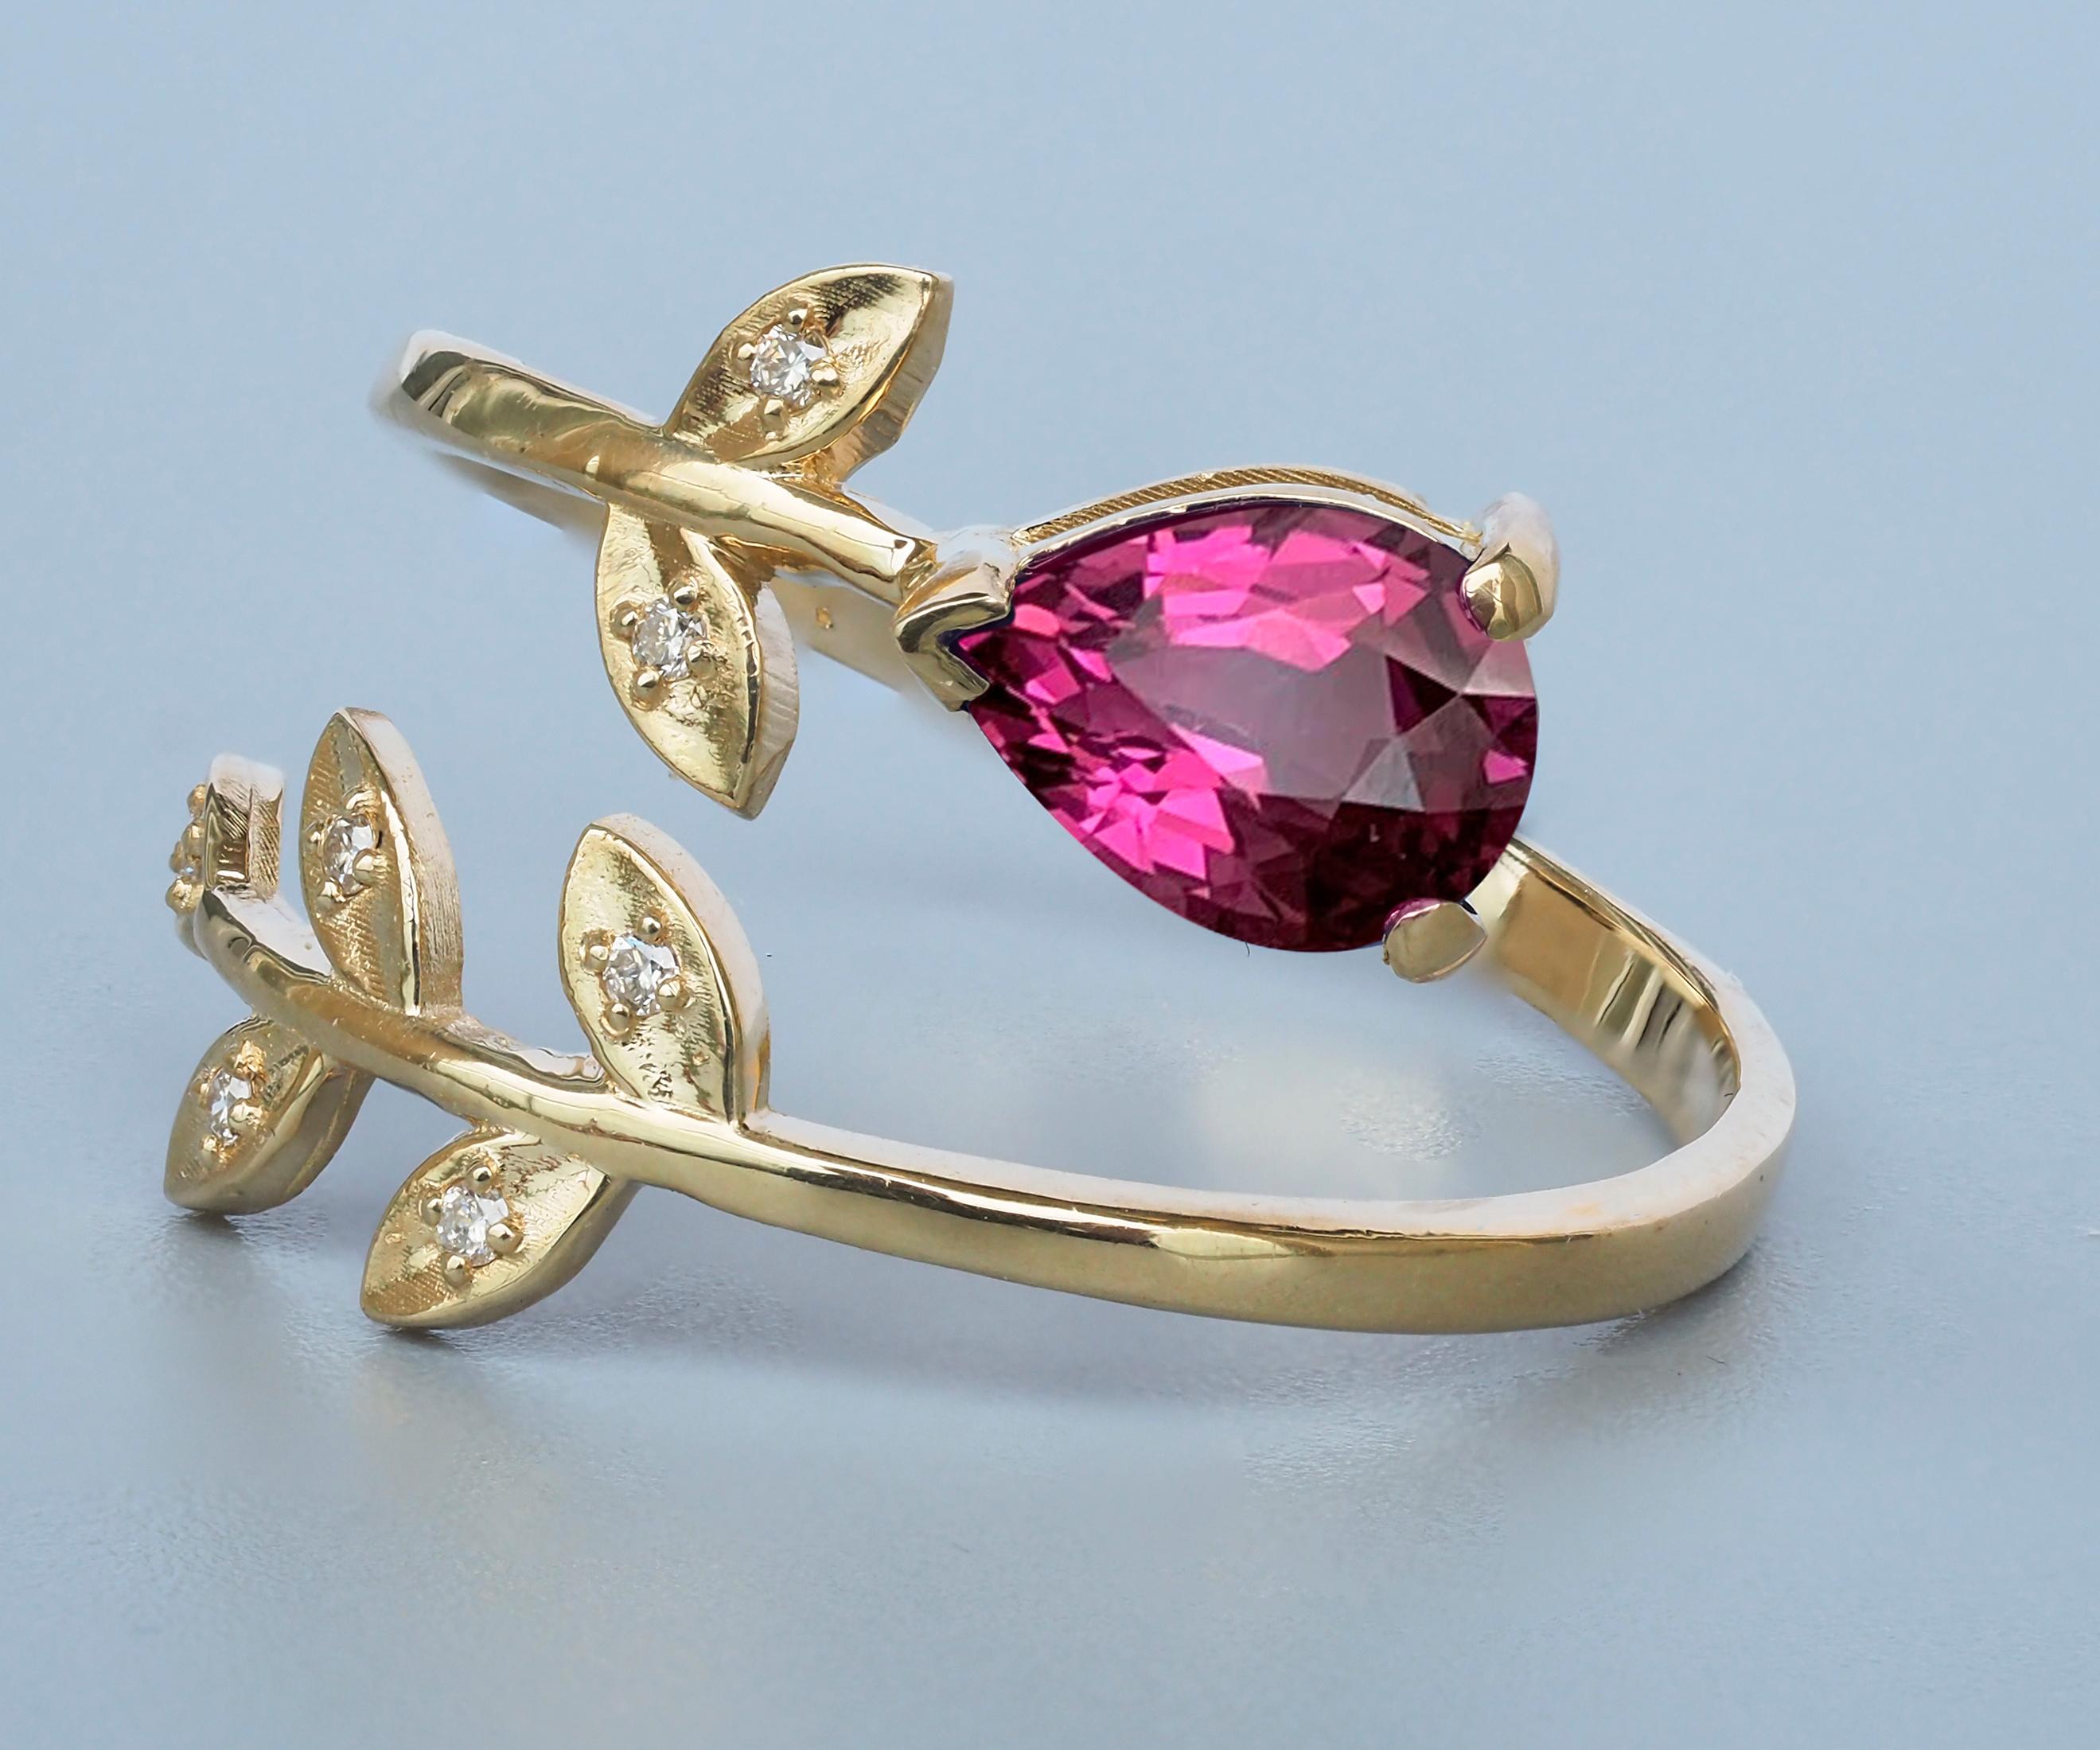 Pear garnet 14k gold ring. 
Open ended garnet ring. Gold leaves ring. Floral gold ring. Delicate gold ring. Adjustable garnet ring.

Metal: 14 k gold
Weight: 2 g. depends from size.

Set with garnet.
Pear shape, approx 0.8 ct, red color.
Clarity: